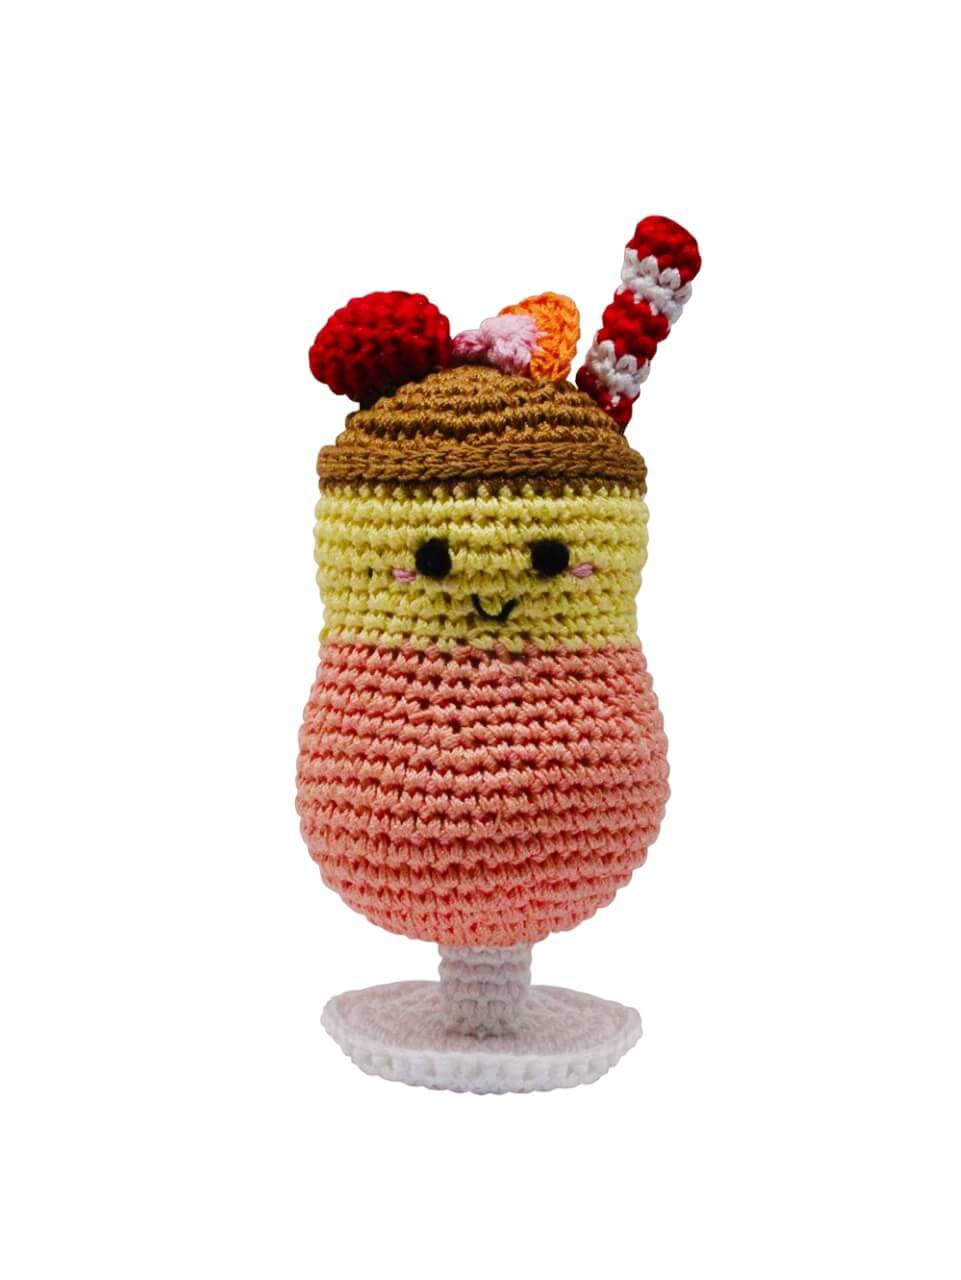 Knit Knacks &quot;Daiquiri&quot; handmade organic cotton dog toy. Anthropomorphic daiquiri drink in a glass with a smiling face and a straw on its head. Layered colors from top to bottom: brown, yellow, peach and white.